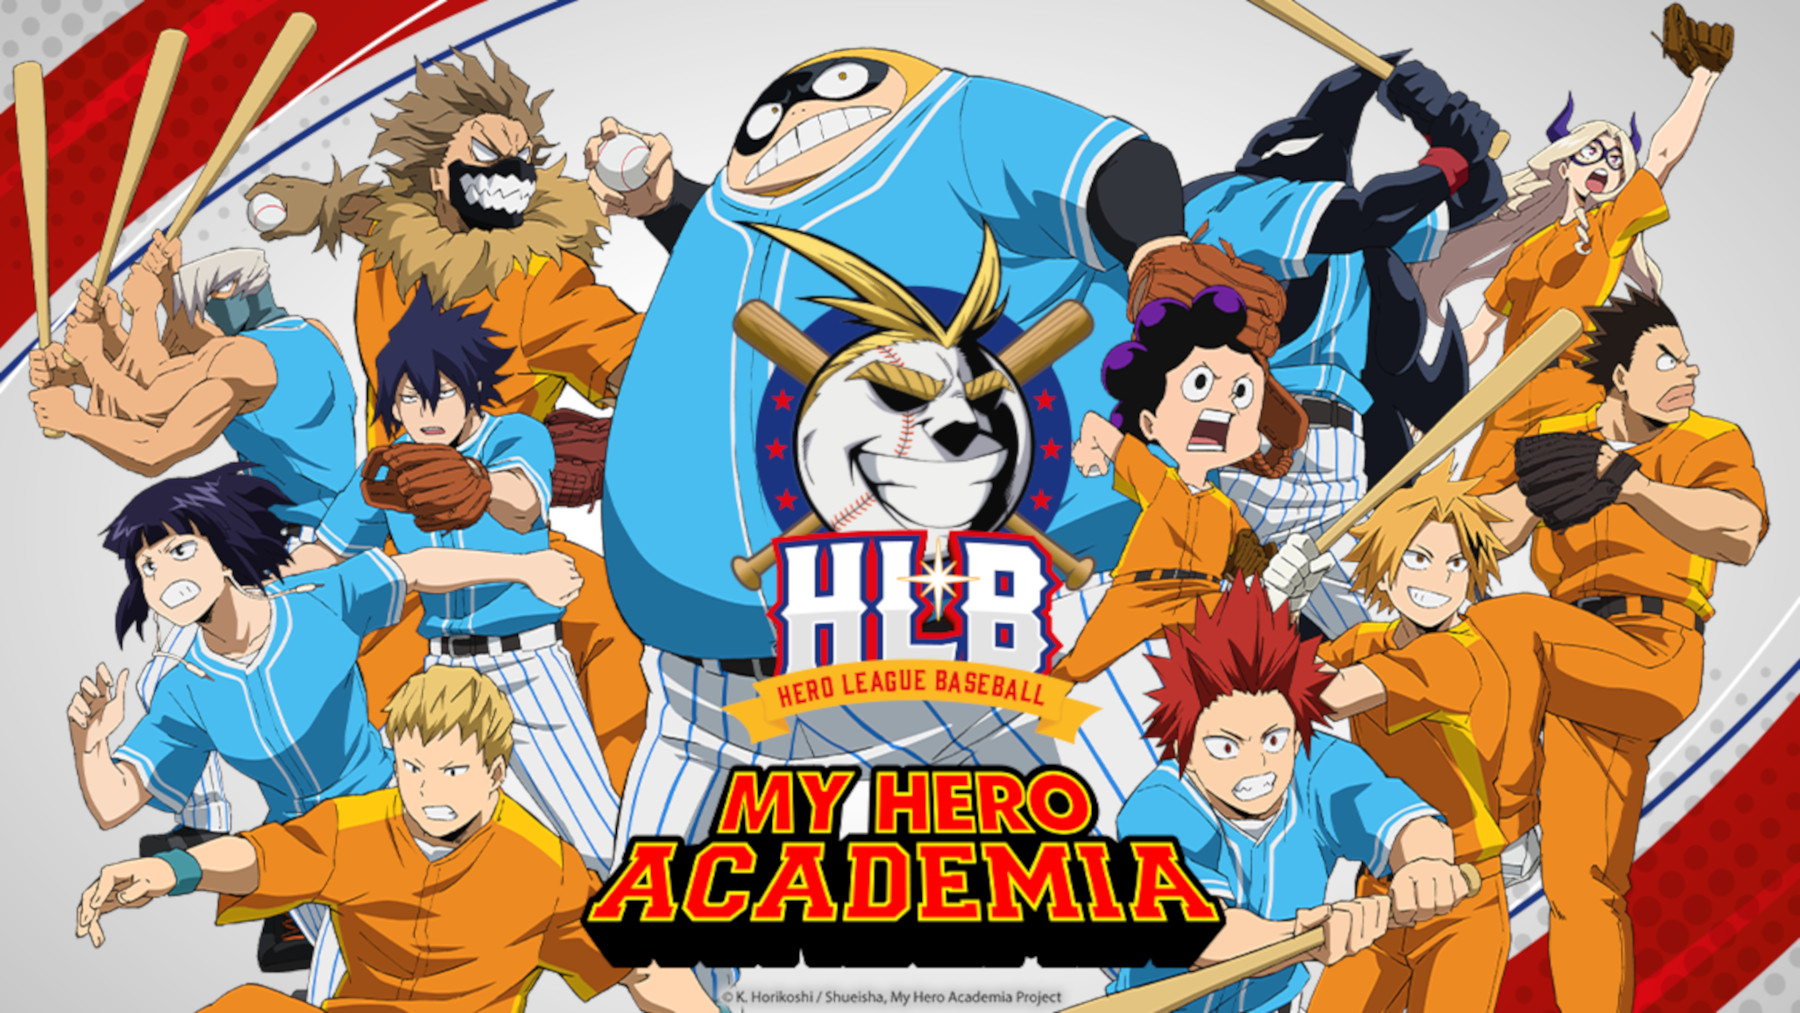 Key art for 'My Hero Academia' Season 5's summer 2022 OVA episodes. It shows the Pro Heroes dressed in orange and blue baseball gear.